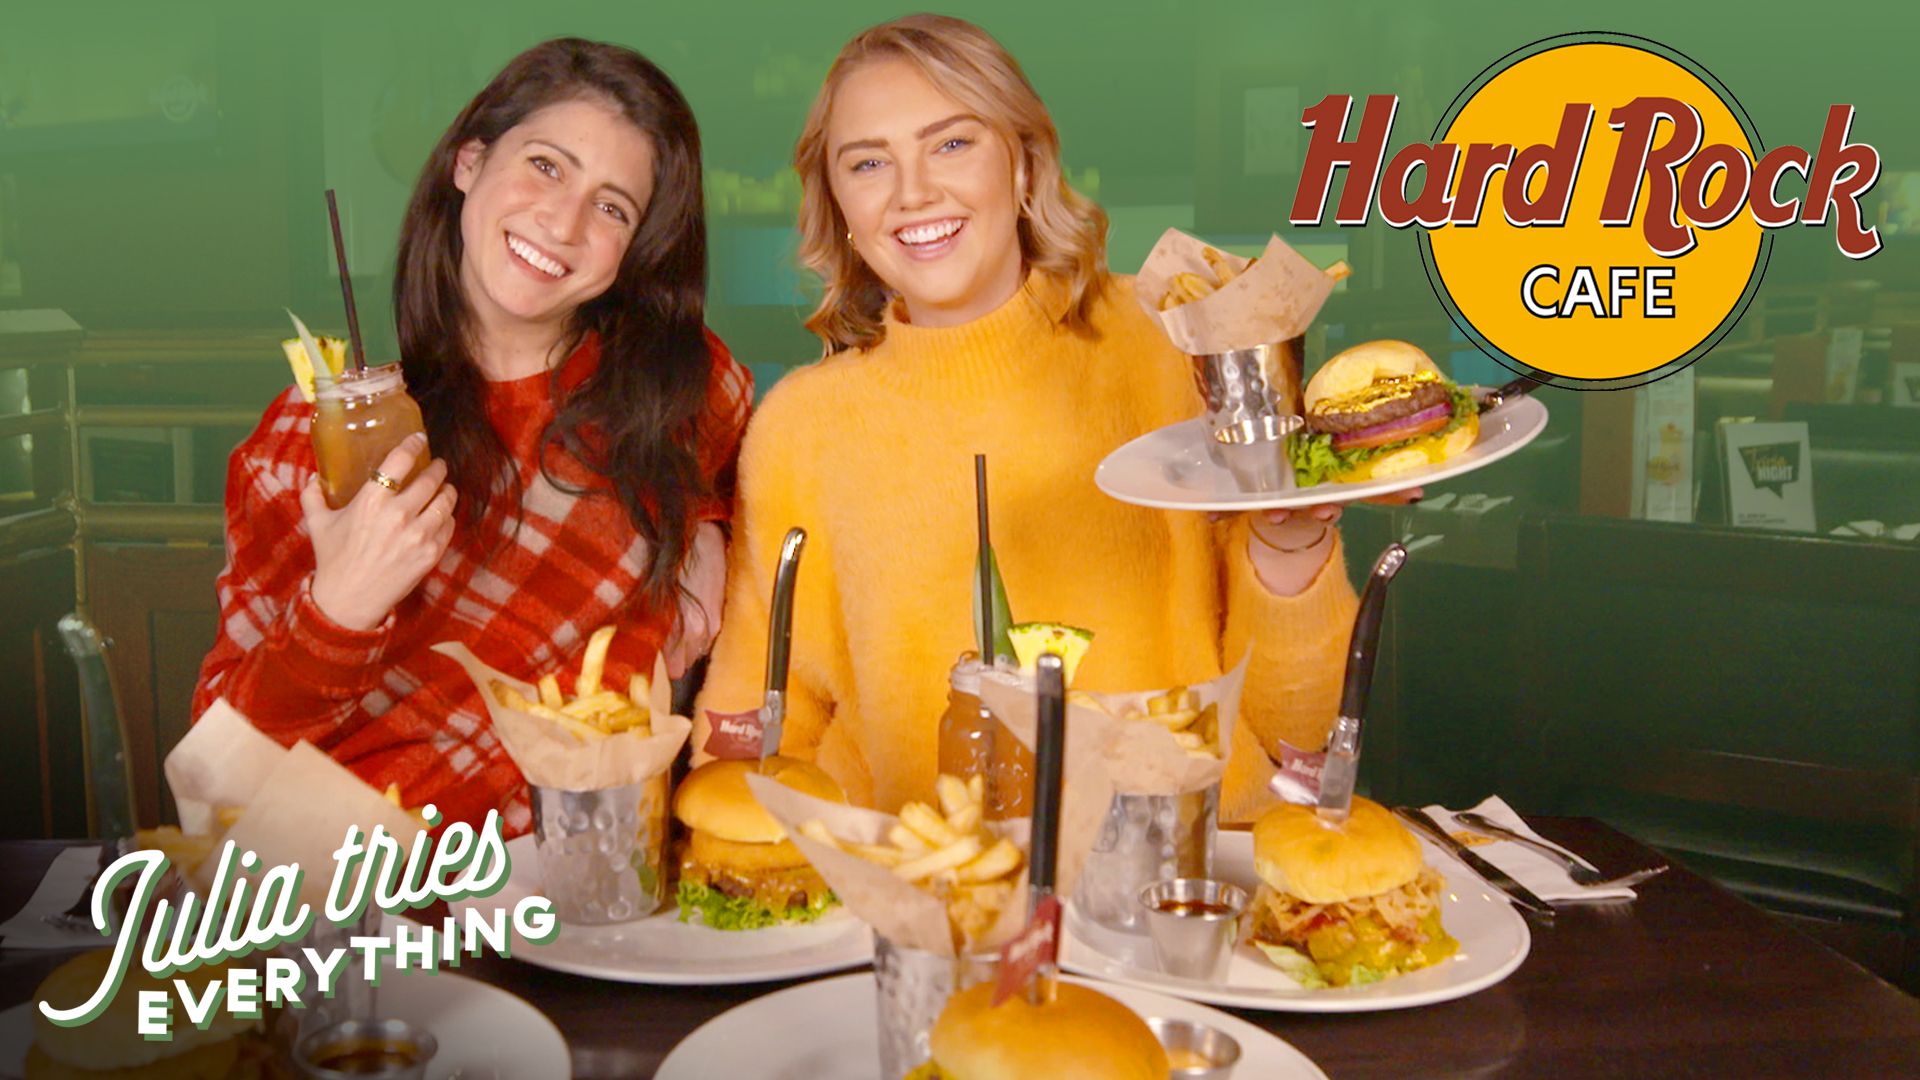 We Tried Everything At Hard Rock Cafe—Here's What's Really Worth Ordering